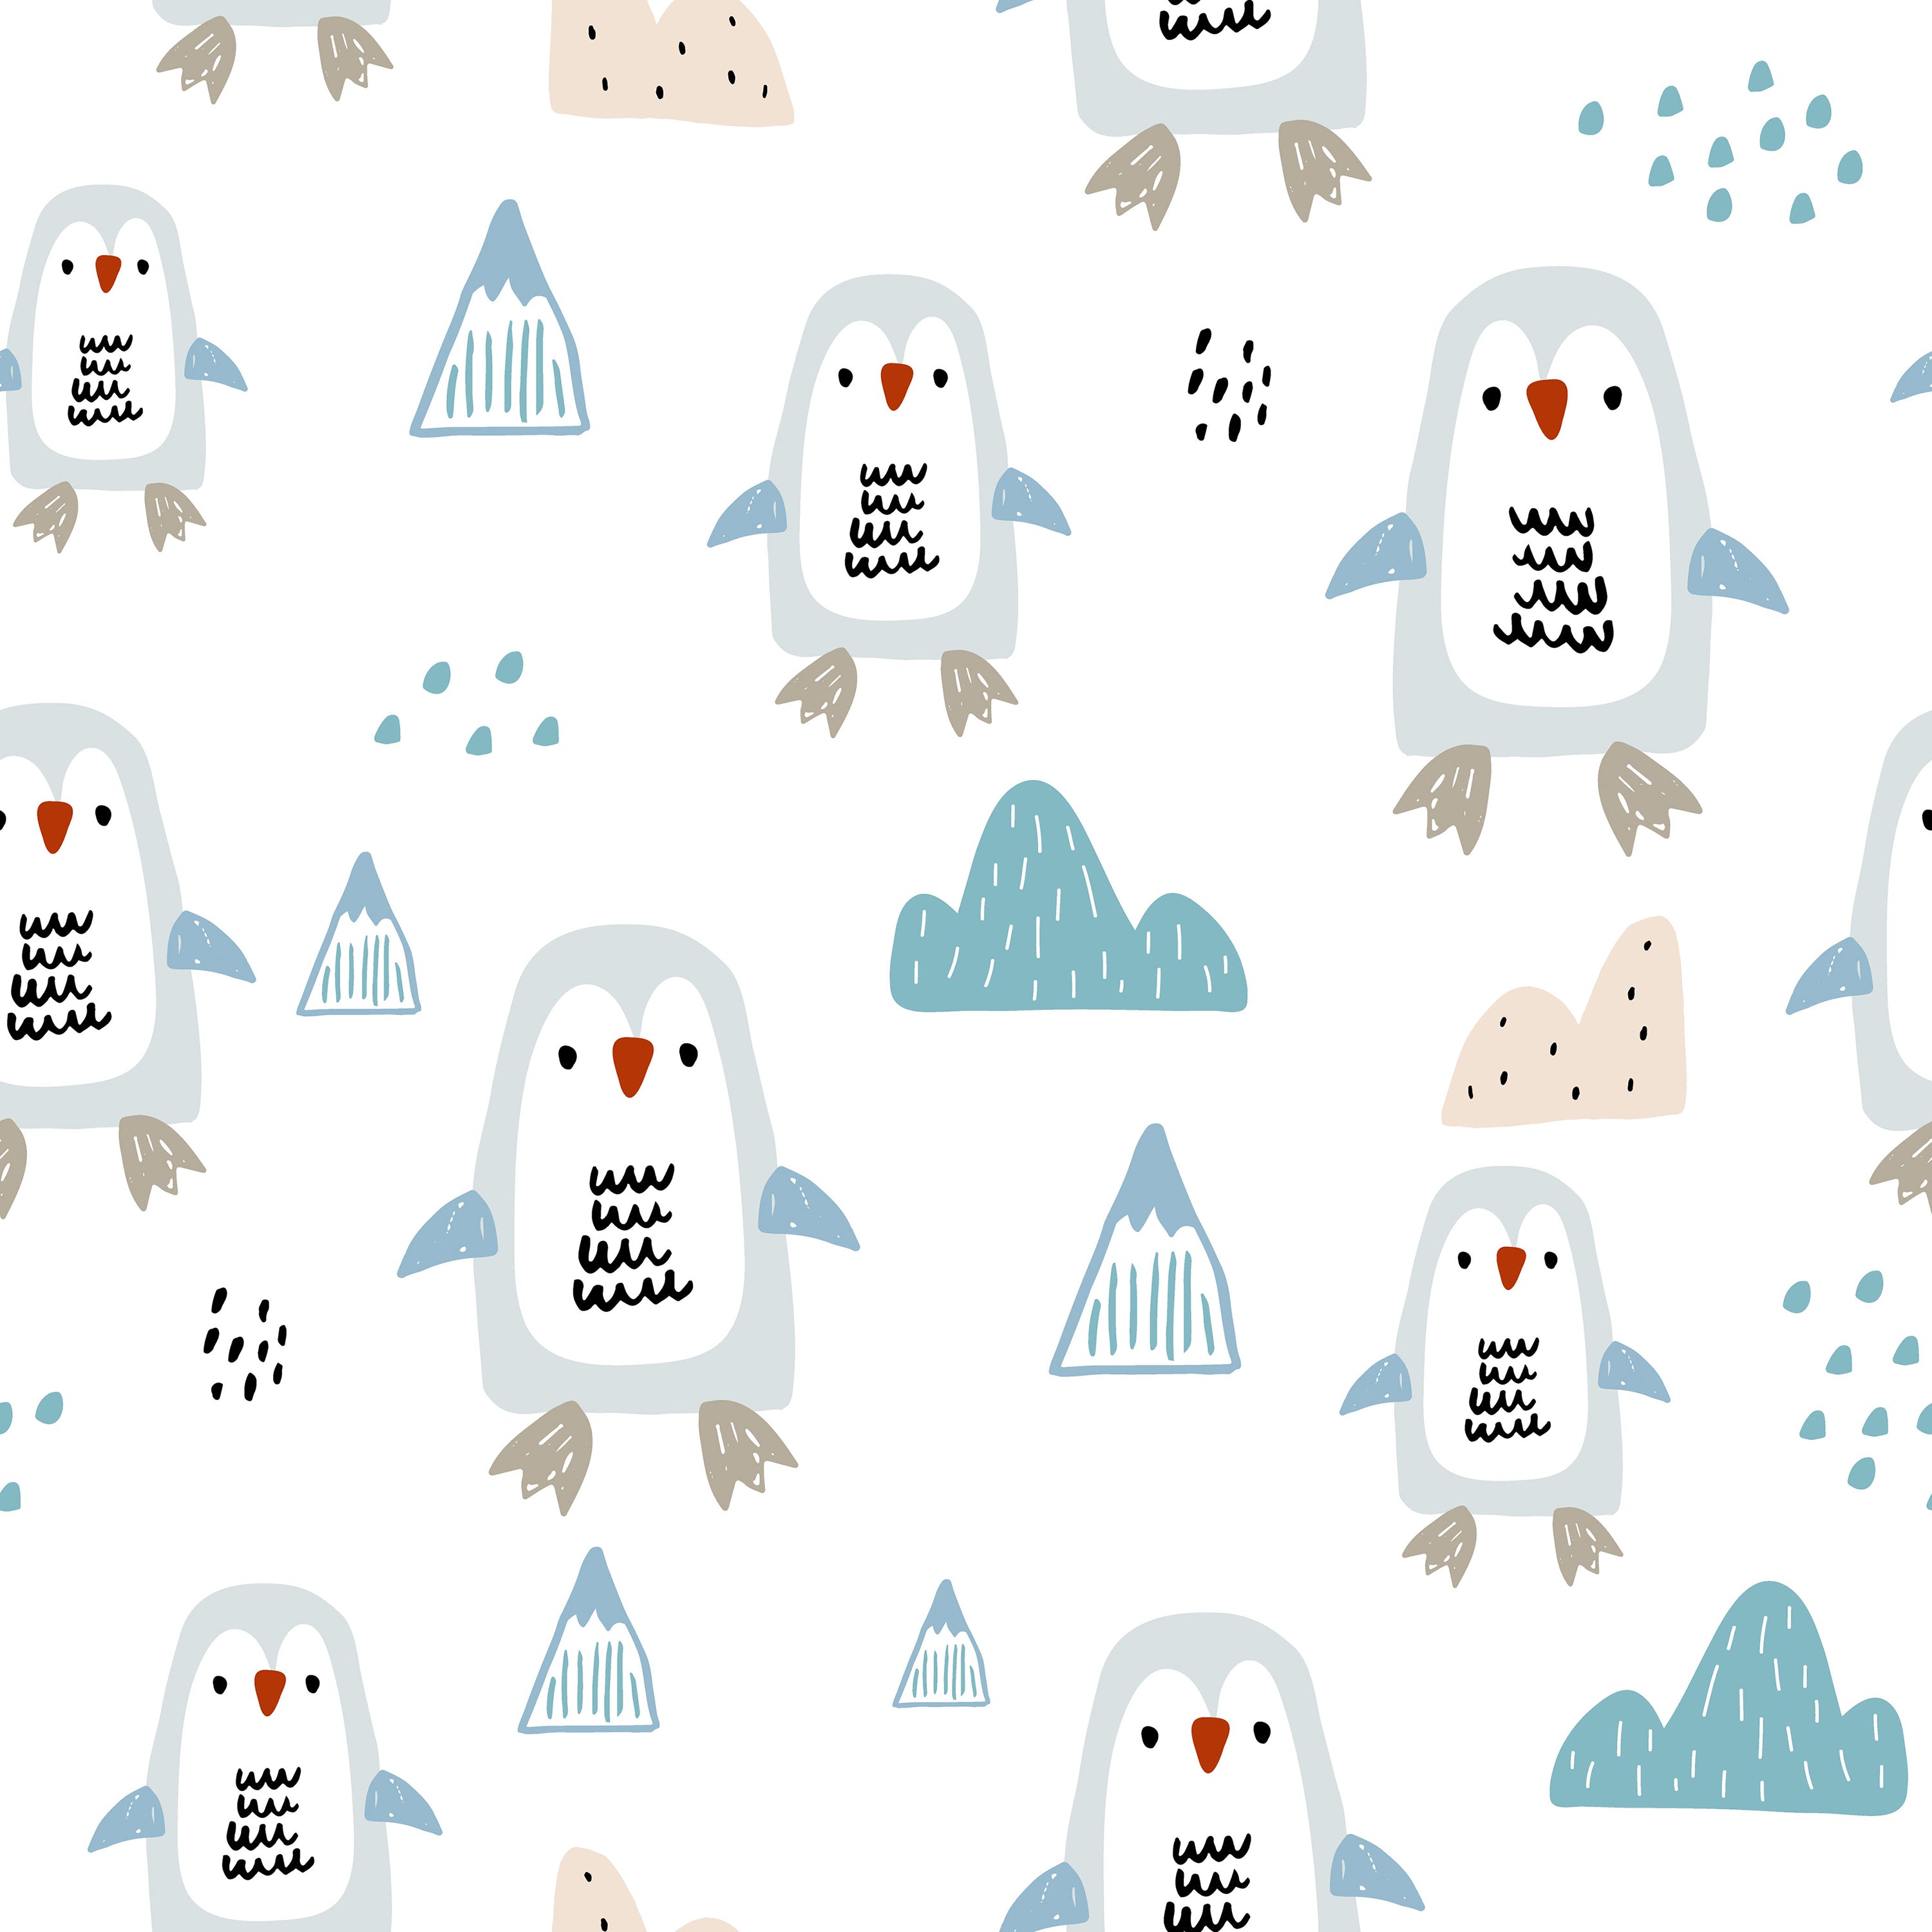 A close-up of the "Nordic Penguin Wallpaper" showing a delightful array of cartoon penguins in various expressions alongside abstract mountains and cloud designs. The colors include shades of blue, beige, and white, contributing to a light and cheerful vibe.